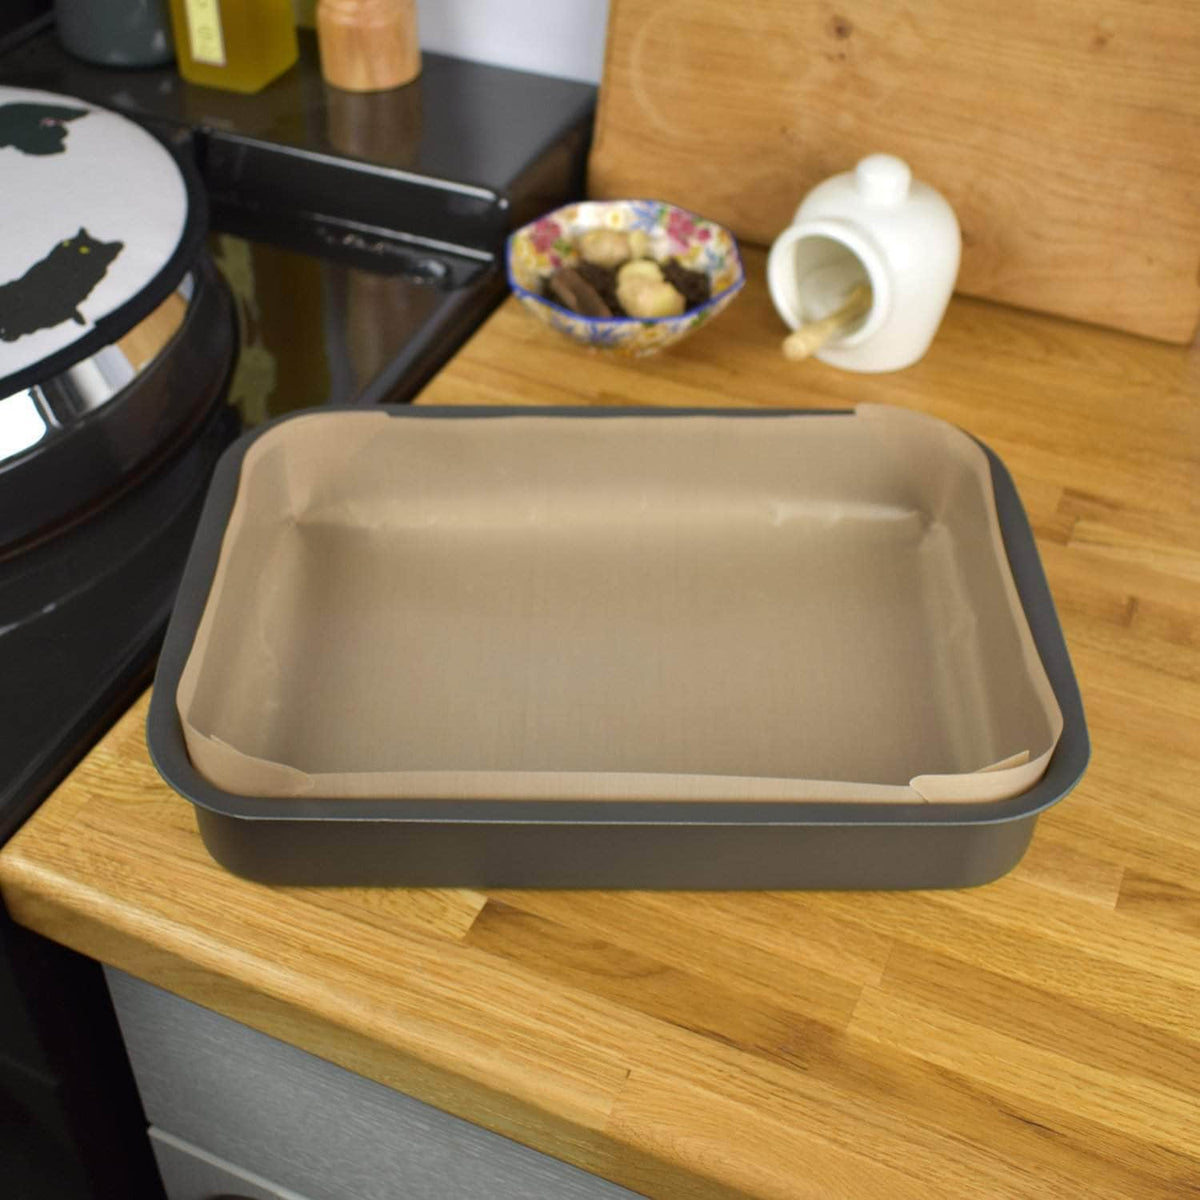 Complete roasting and baking tray non-stick liner set - The Full Monty! Save £7-10 on individual cost